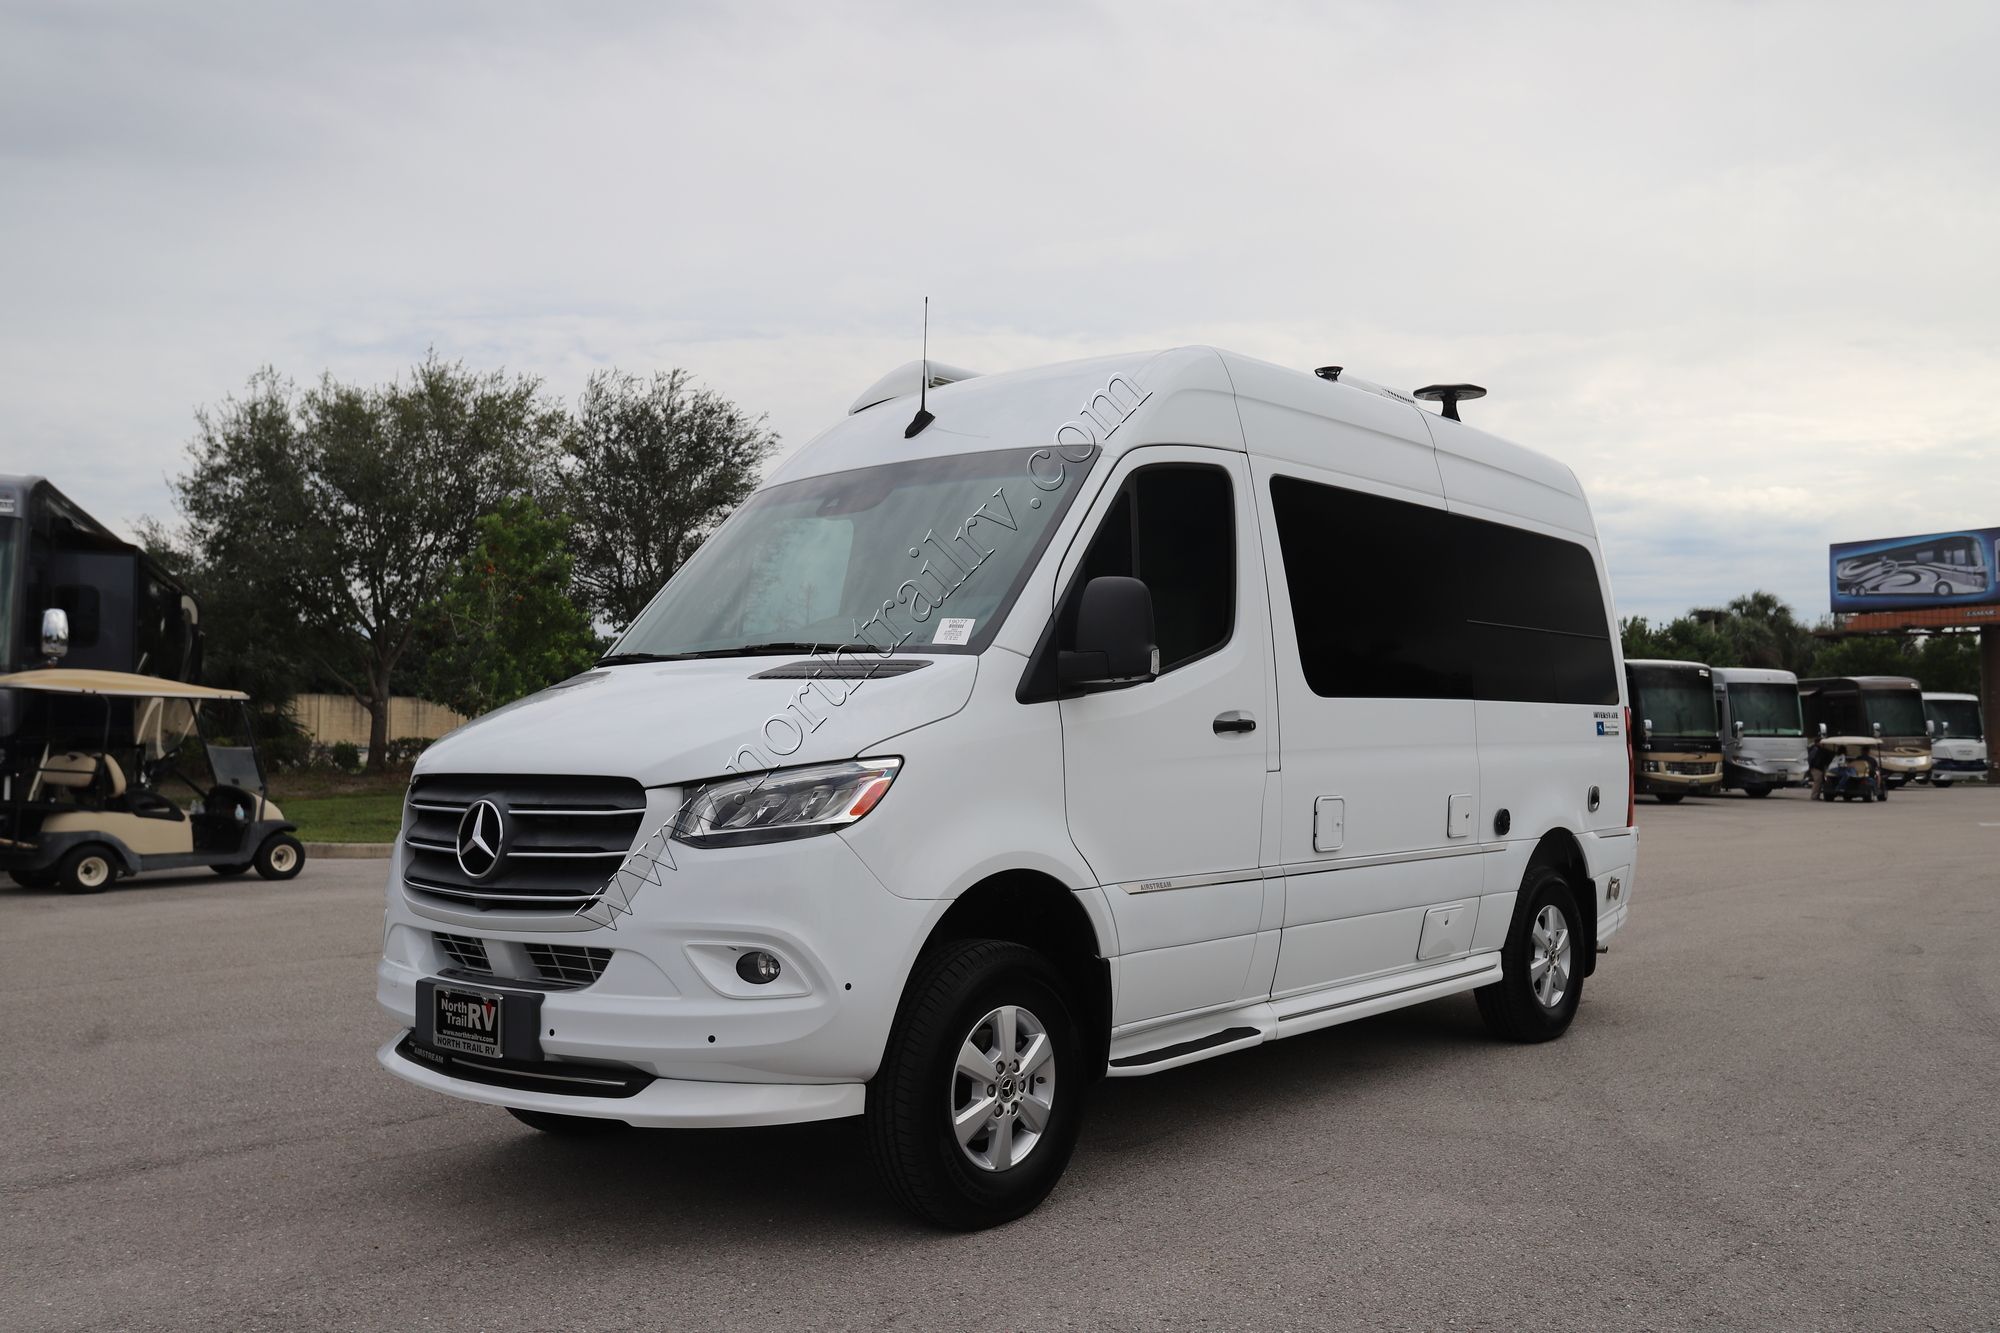 Used 2022 Airstream Interstate 19 Tommy Bahama 4X4 Class B  For Sale